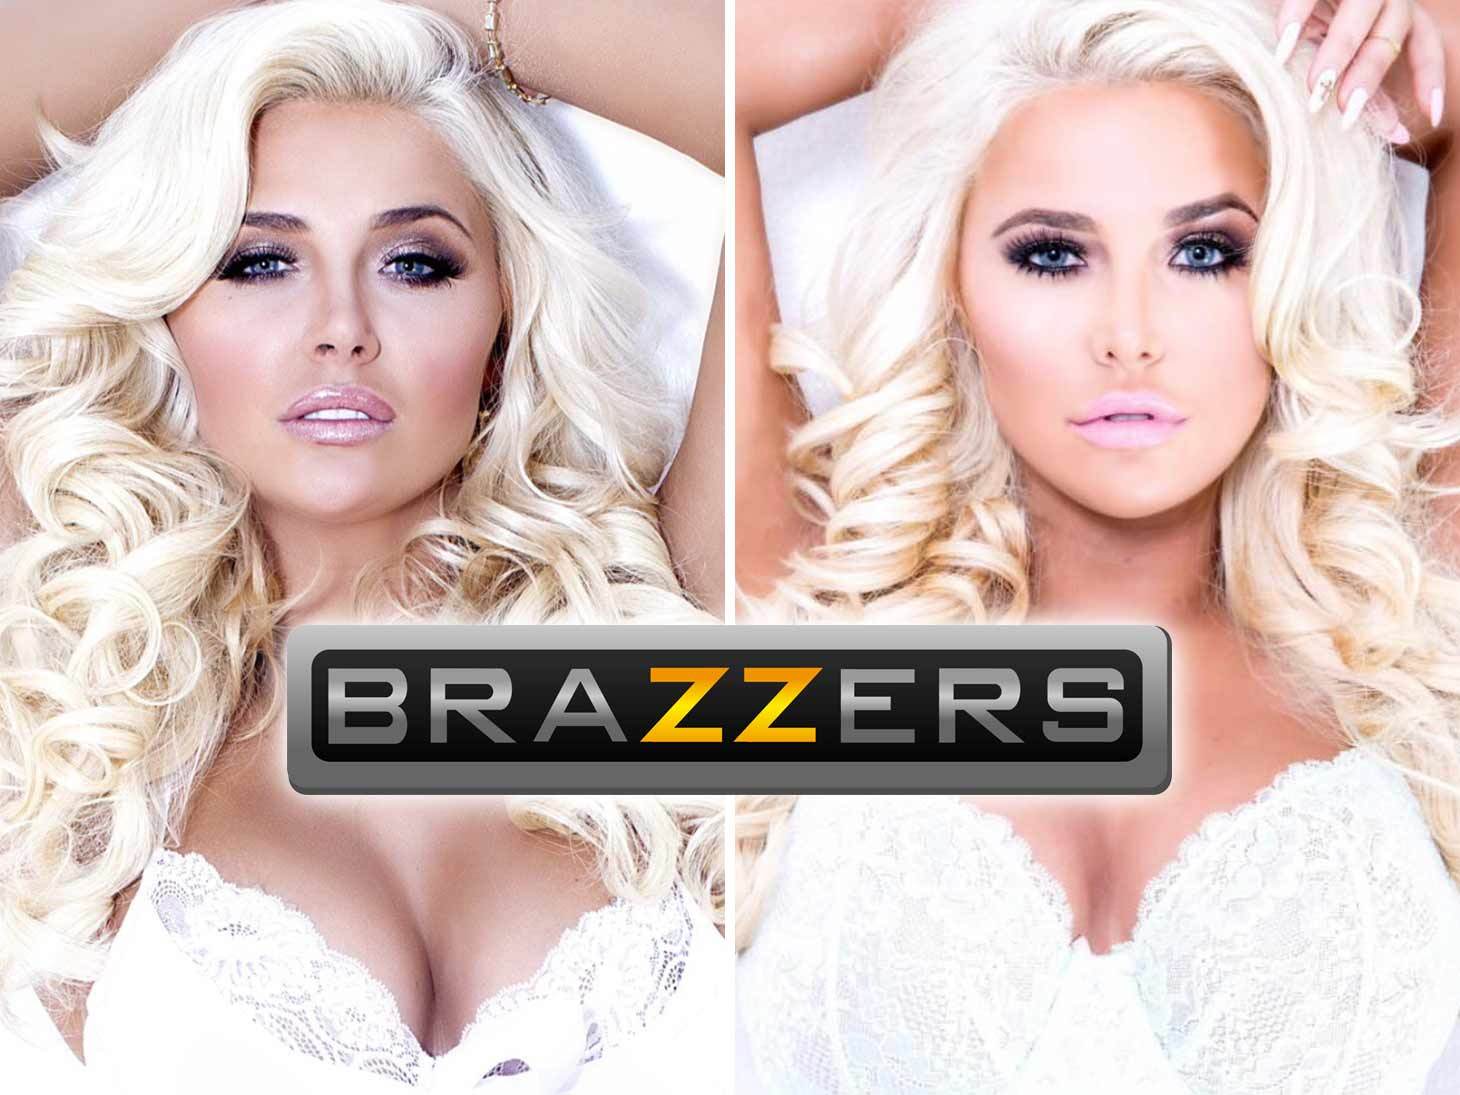 Playboy Brazzers Vds - Playboy Twins Karissa & Kristina Shannon Sign Hardcore Porn Deal With  Brazzers